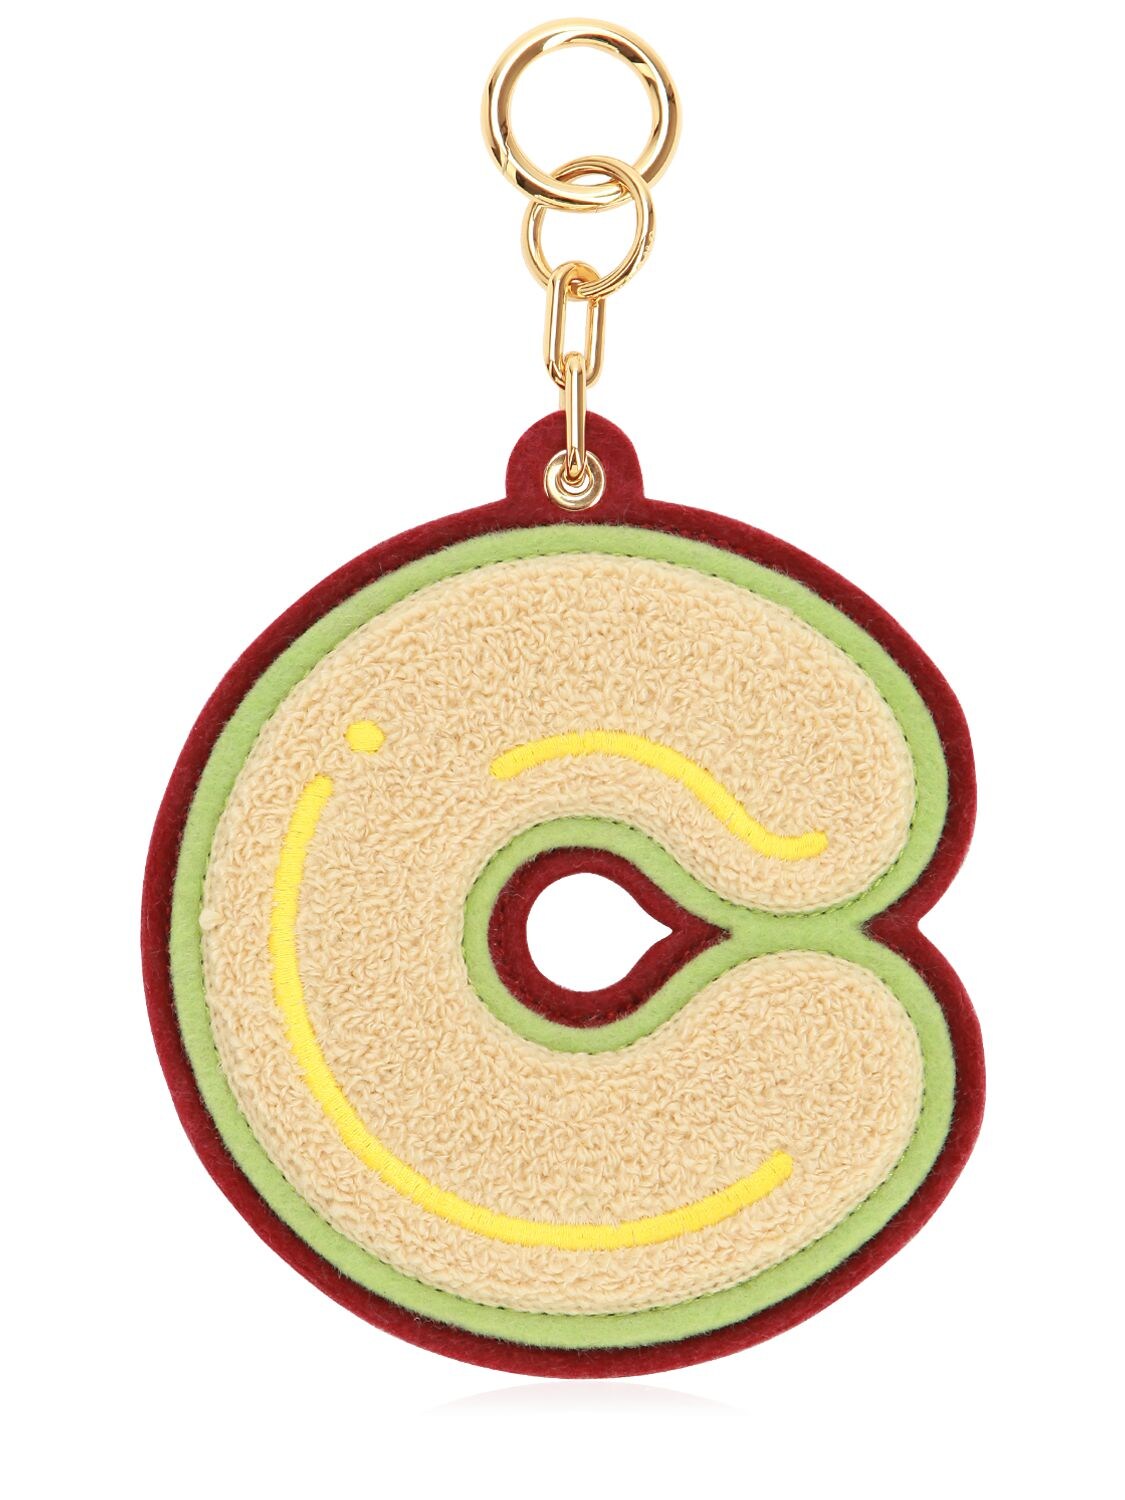 Chaos C Chenille Luggage Tag In Champagne